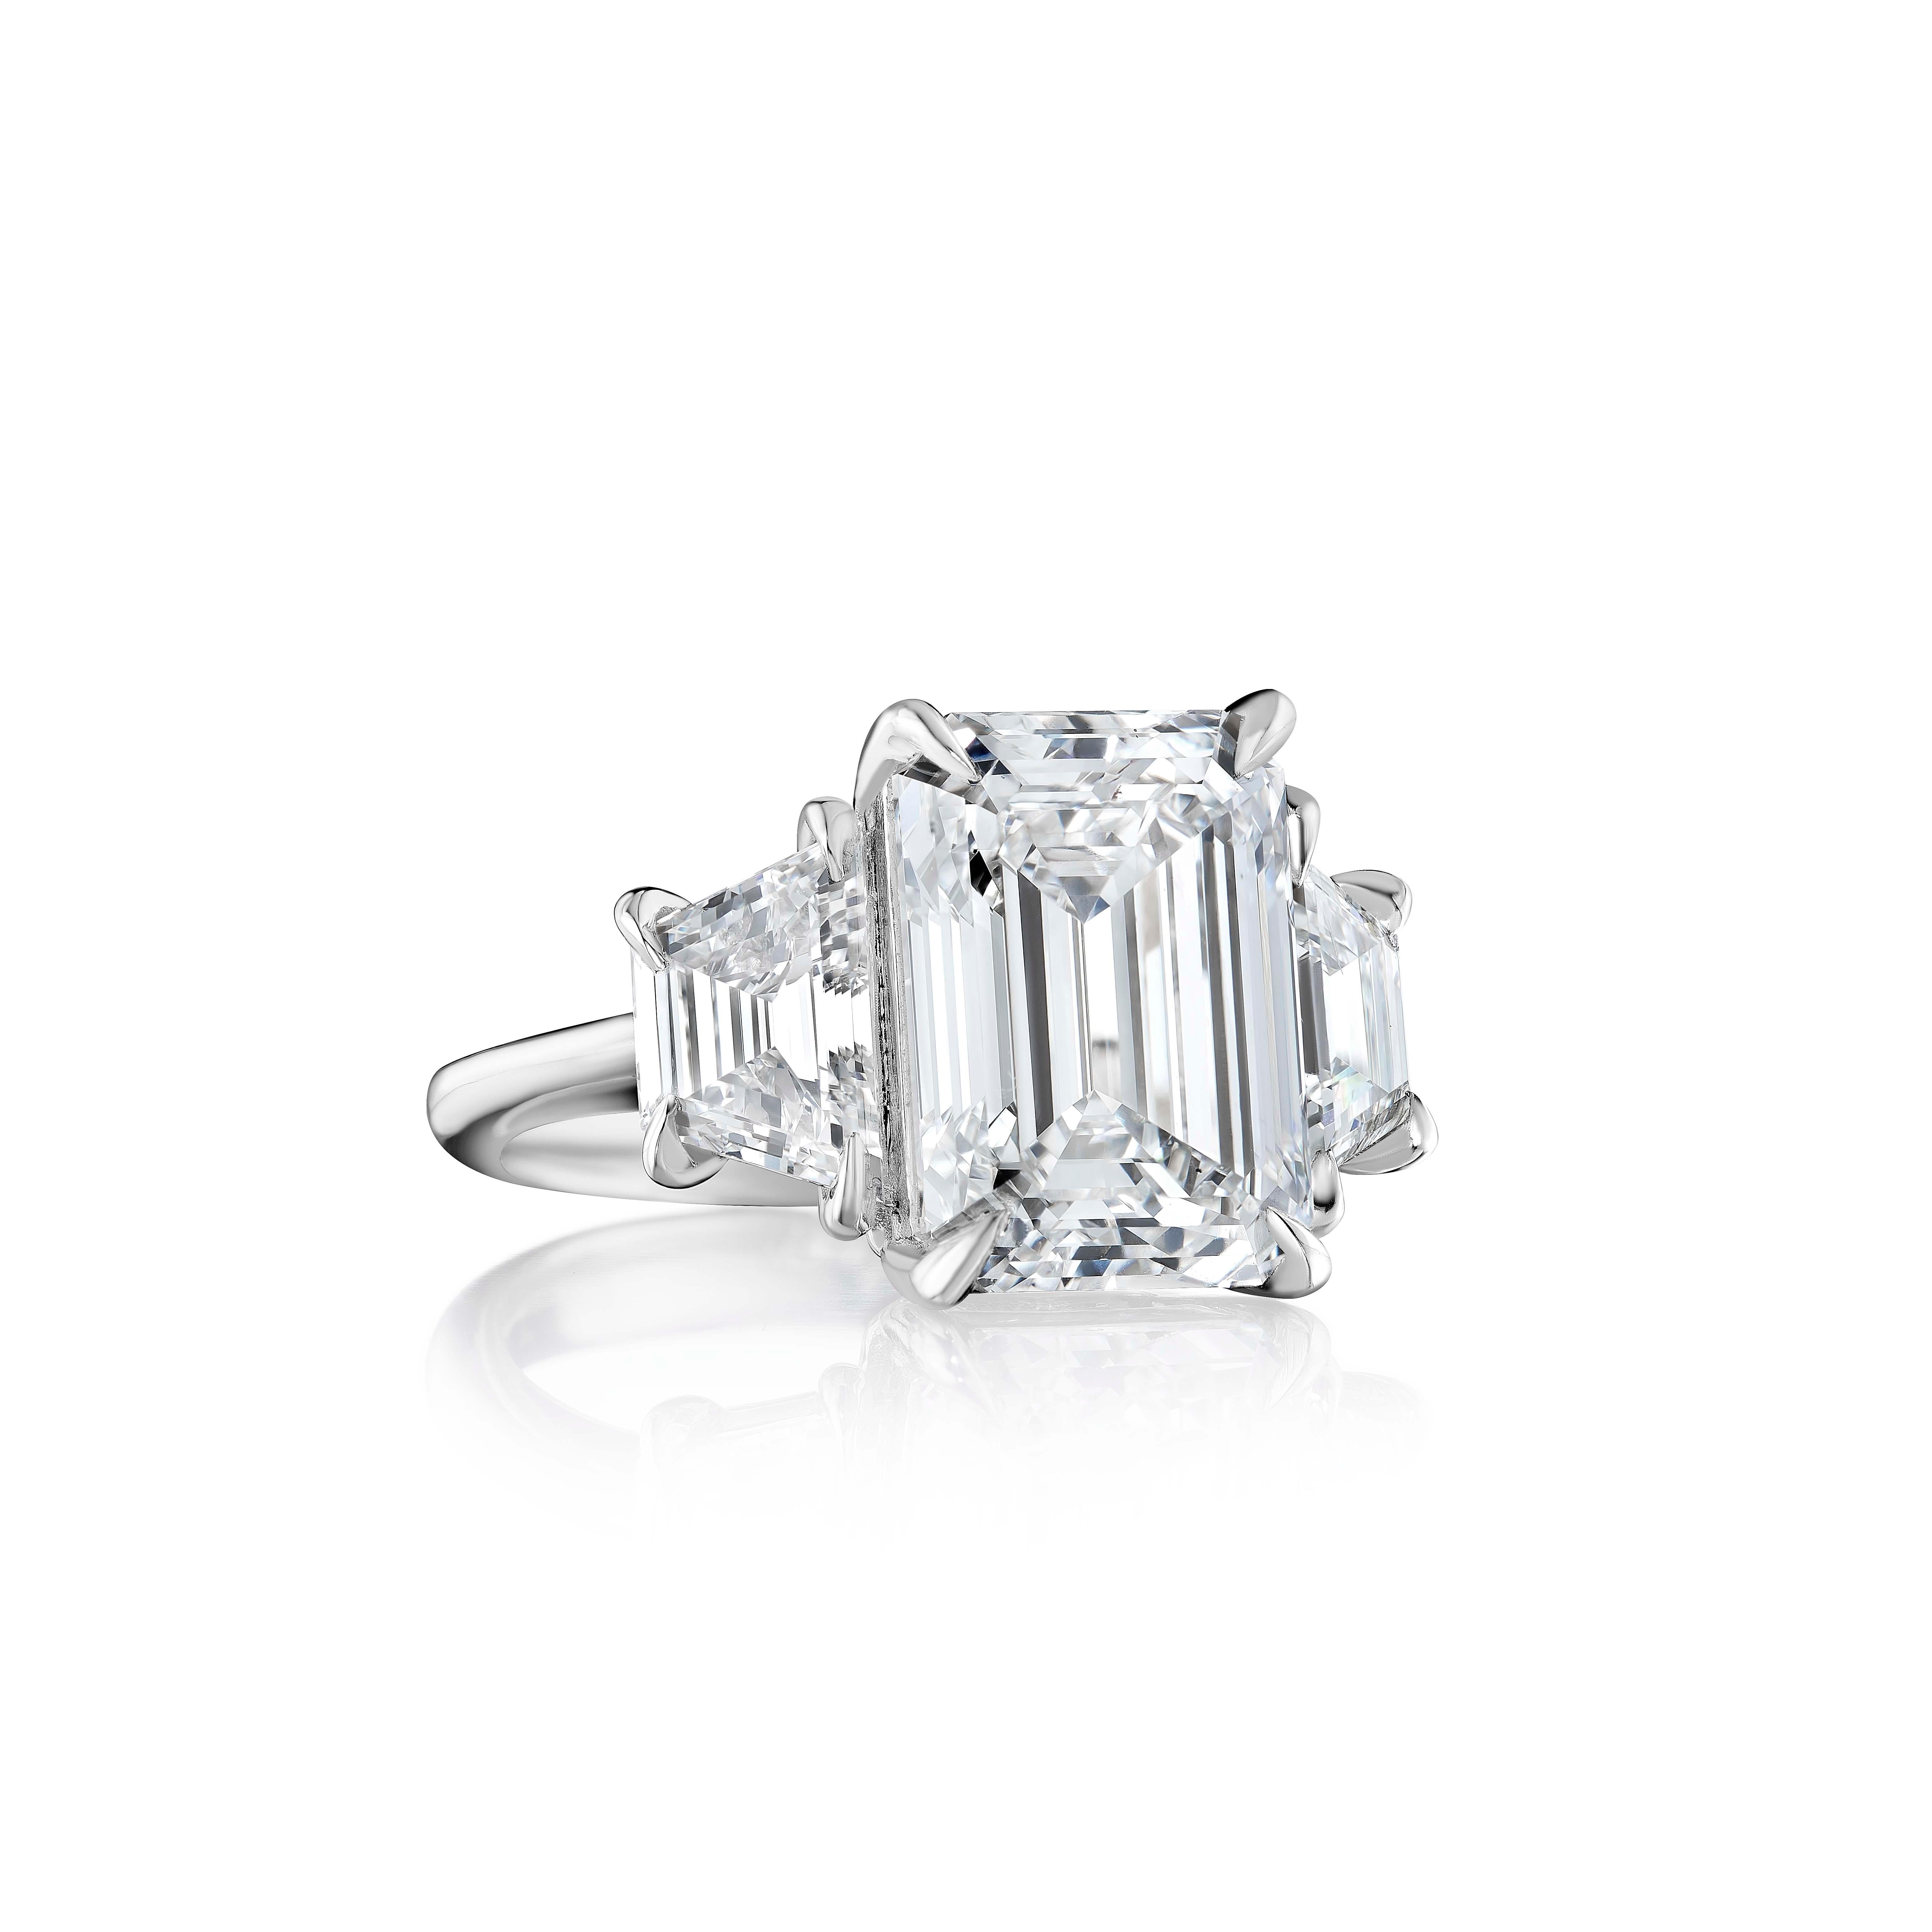 Emerald Cut Diamonds weighing 15.2 Carats, flanked by Trapezoid shaped Diamonds and set in Platinum.
Beautiful proportions and great life to this Diamond
Diamond is certified by GIA as H color and VS2 clarity.
Set in Platinum.
Size 6.

Style